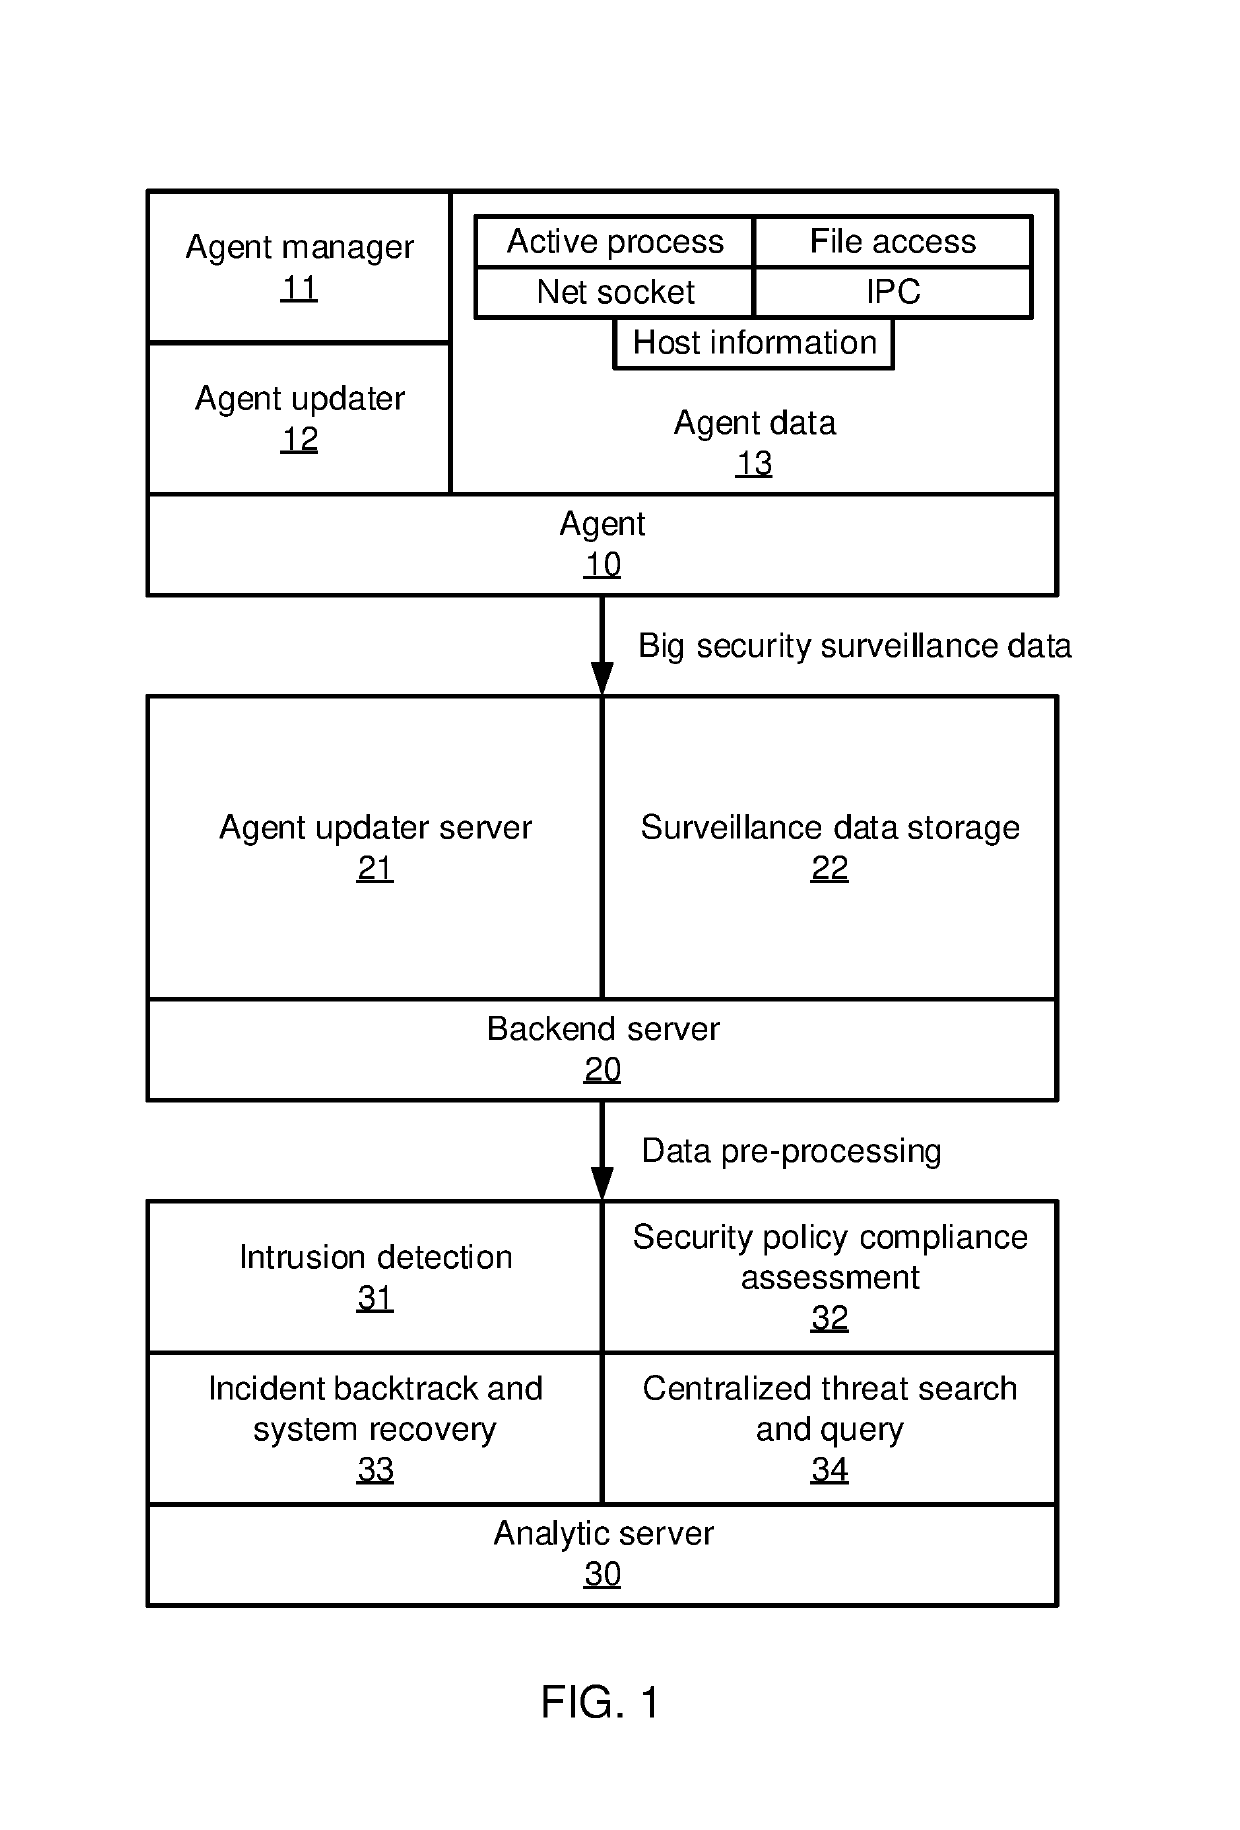 Graph-based attack chain discovery in enterprise security systems